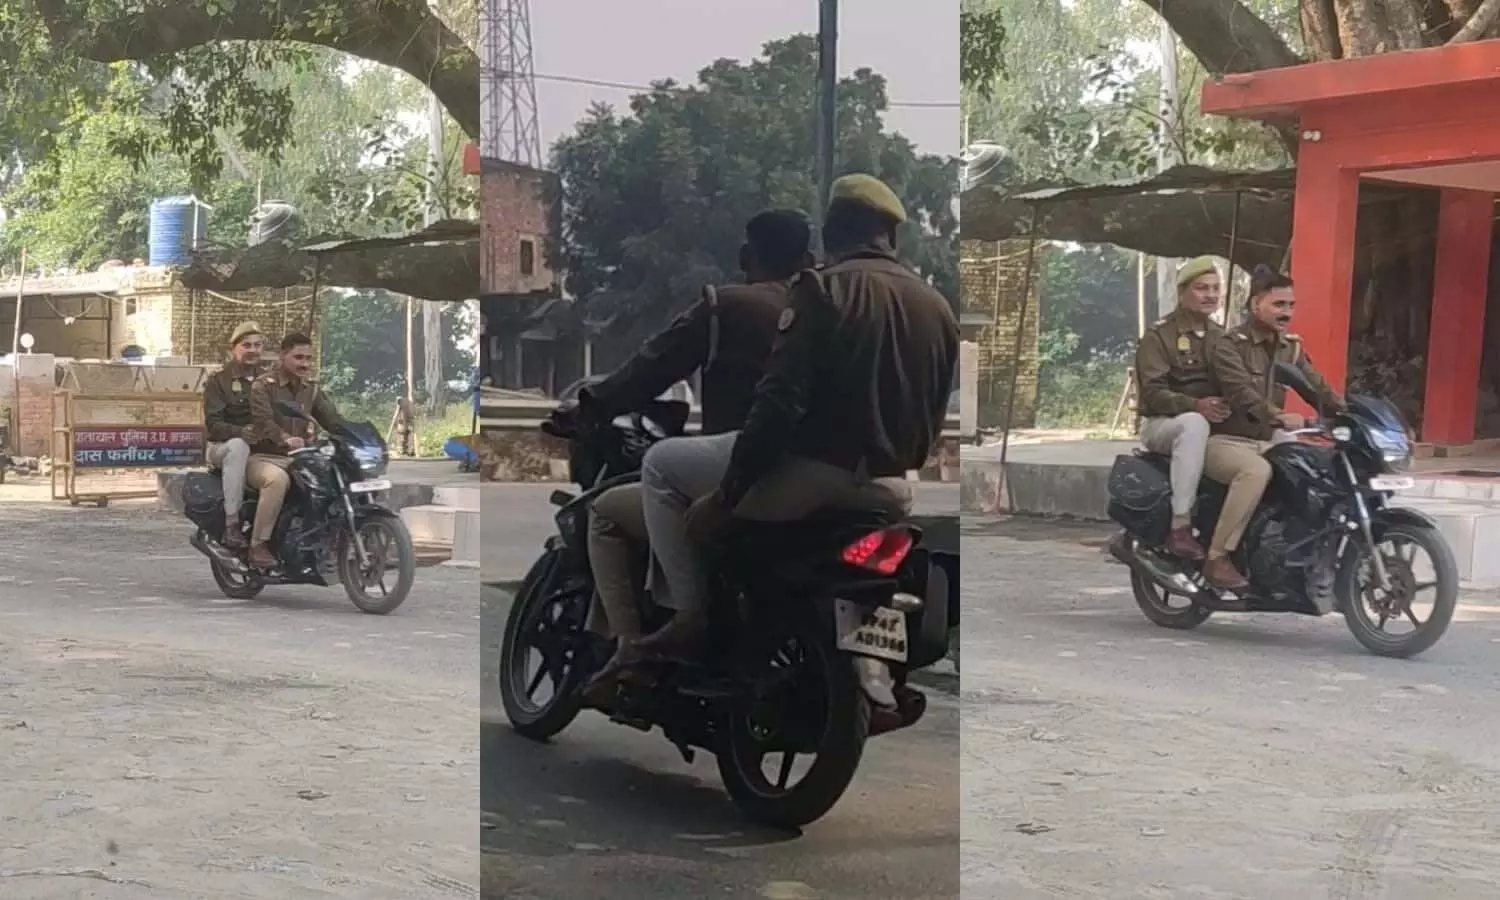 In Azamgarh, the police who teach traffic rules to others are themselves flouting the rules.